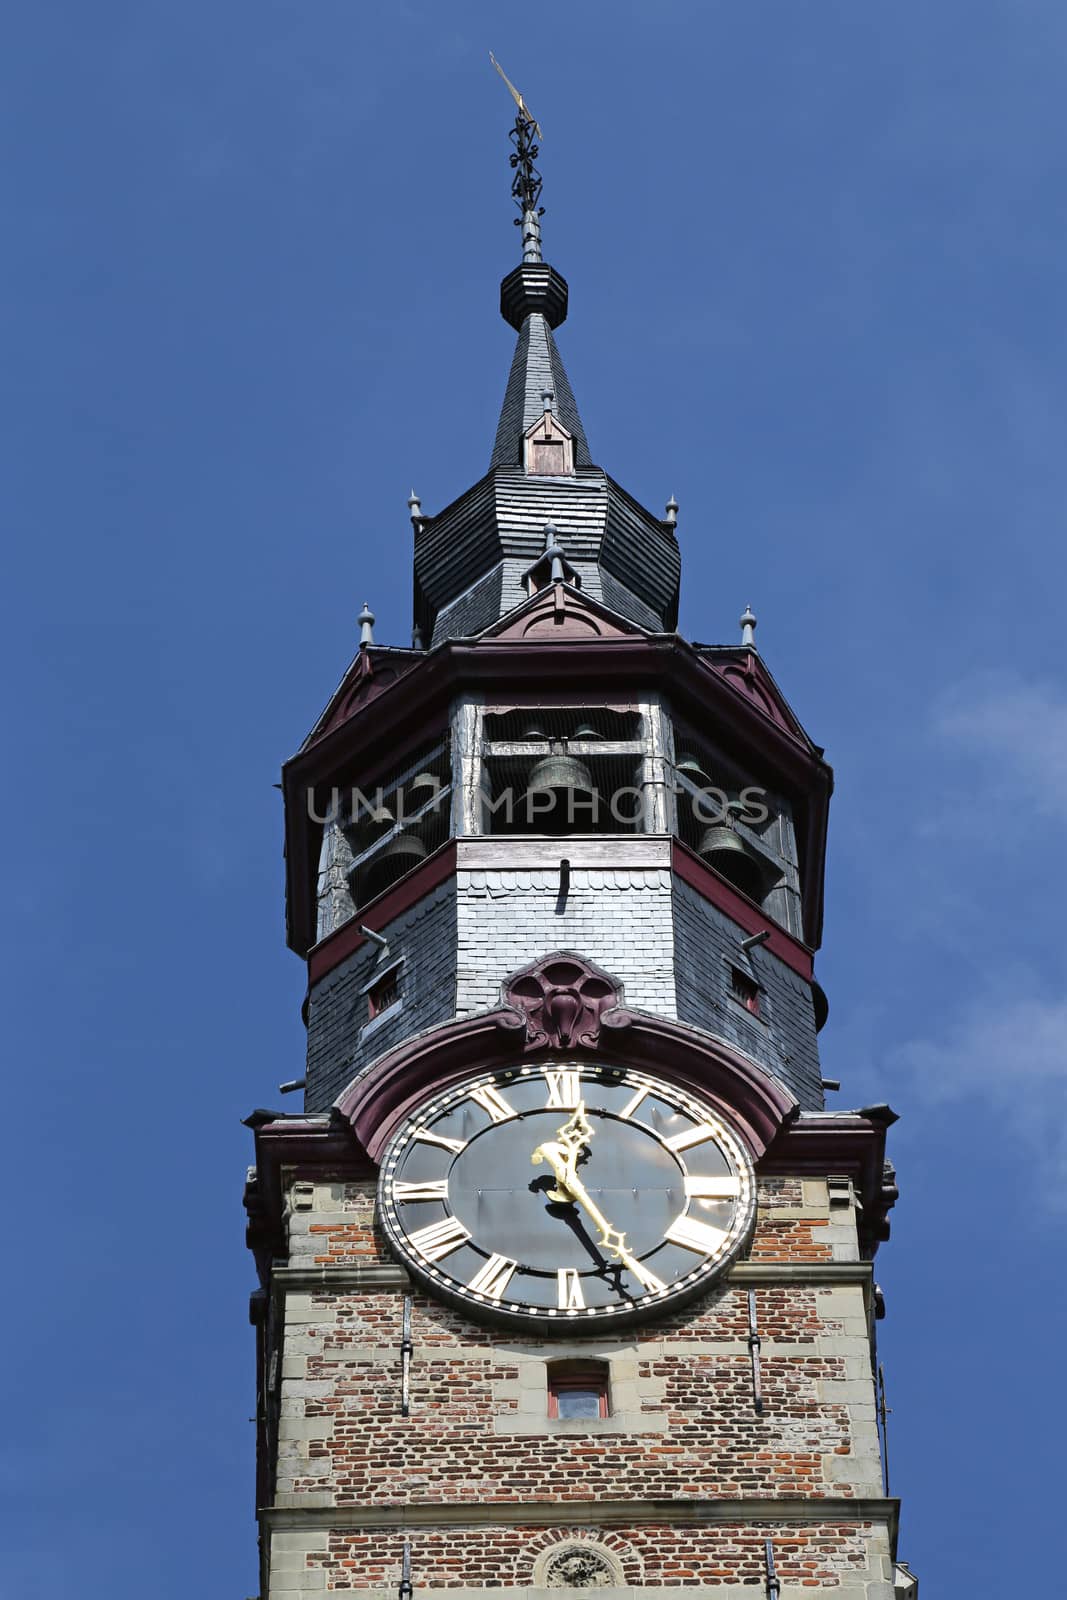 The town hall in the historical centre of Sint-Truiden, Belgium, with a 17th-century tower classified by UNESCO as a World Heritage Site in 1999. The oldest parts of the building date from the 13th century.